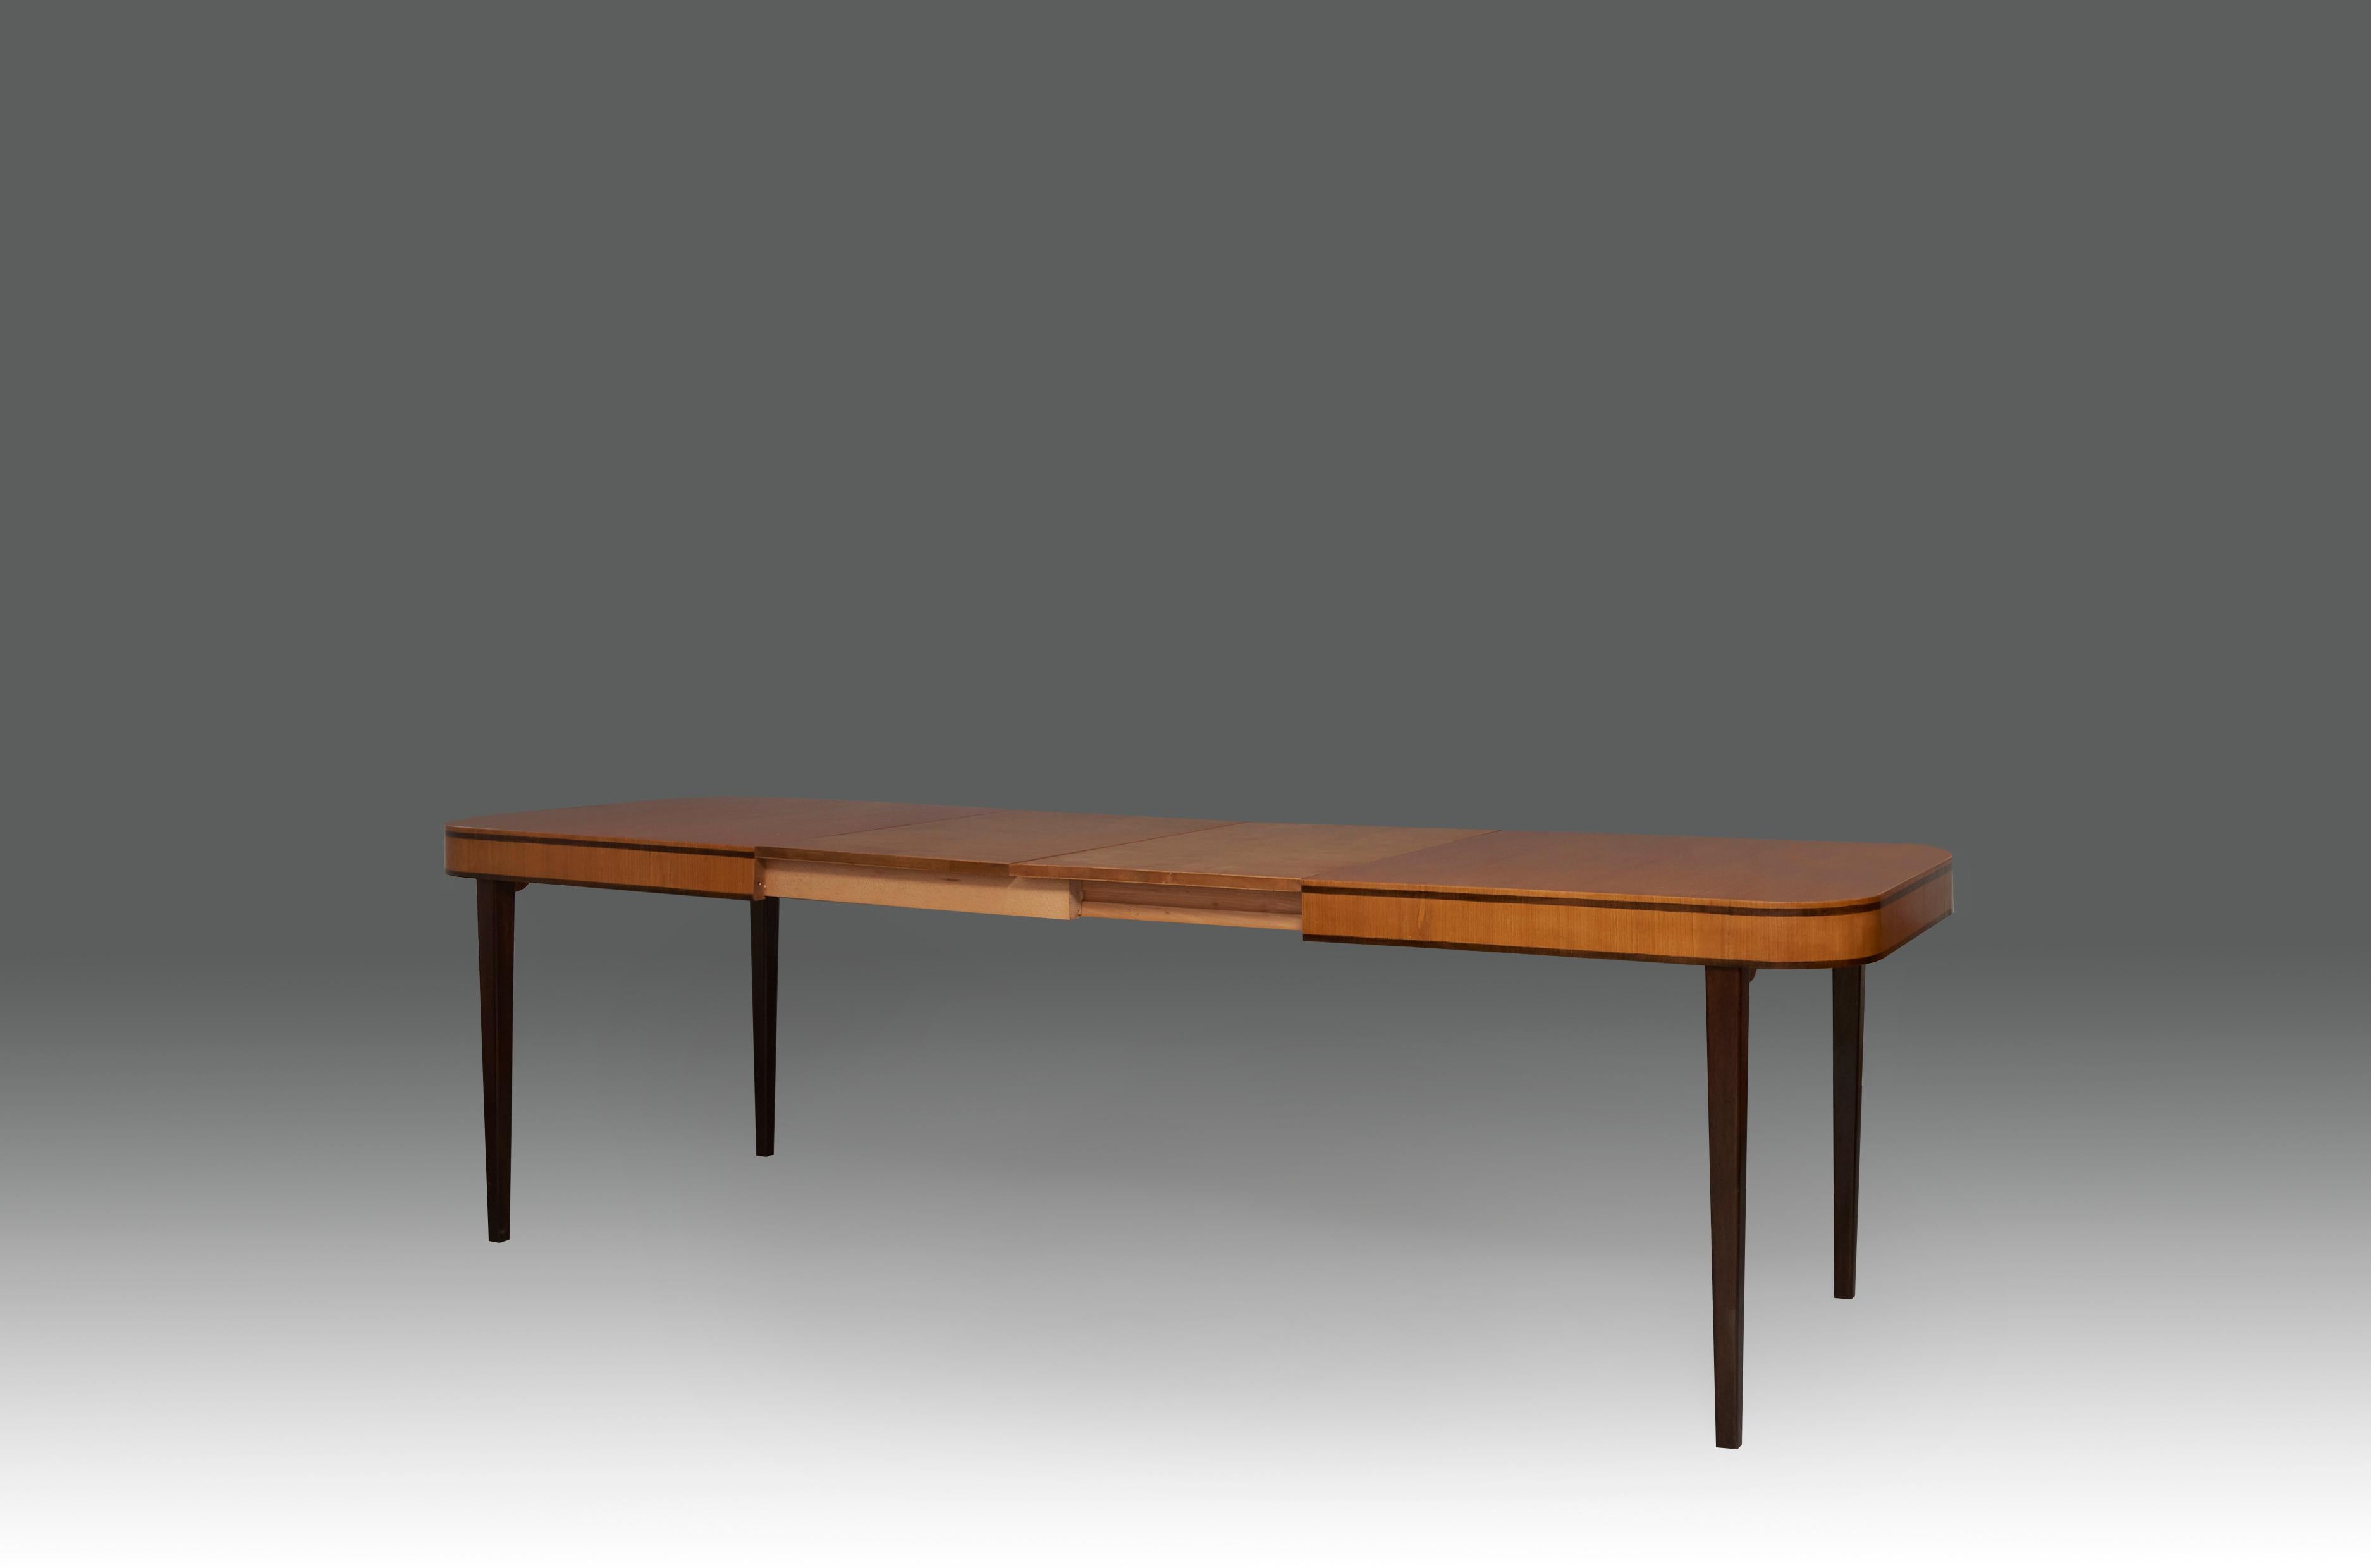 Swedish 1930s Axel Einar Hjorth Extesible Dining Table For Sale